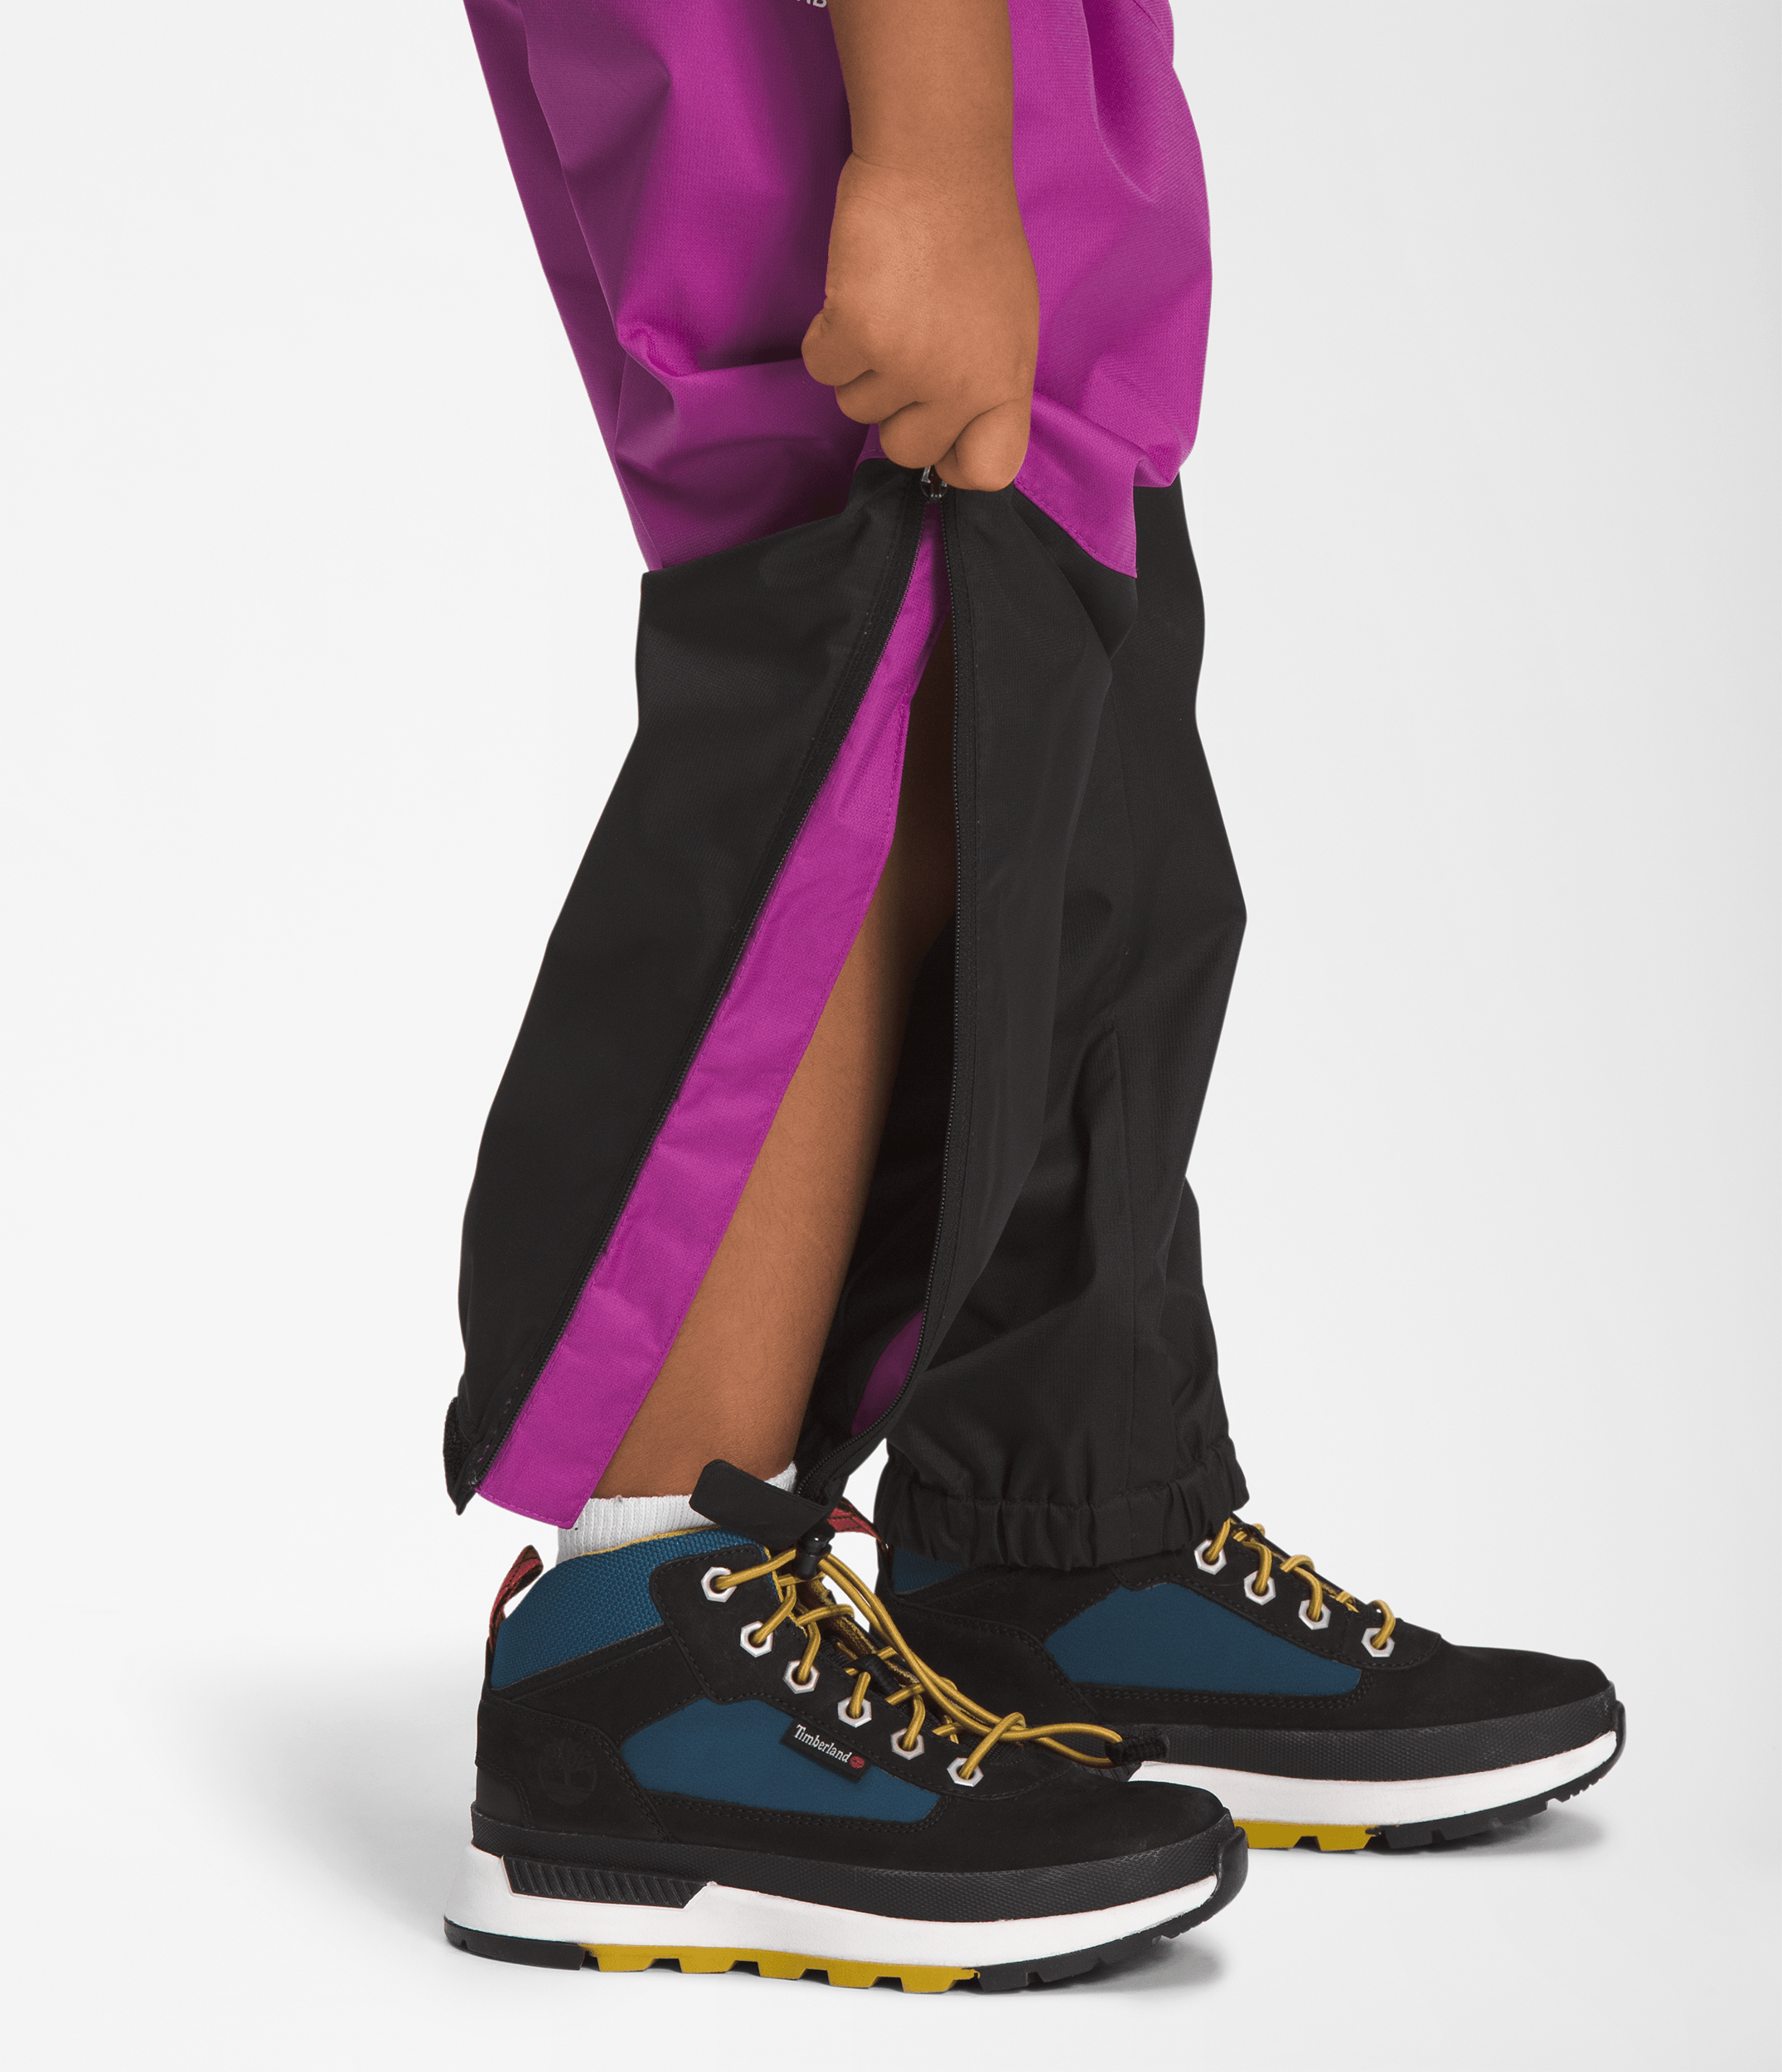 Leg of The North Face Kids Antora Rain Pants in Purple Cactus Flower with reverse-coil leg zips open from cuff to knee for easy on/off.